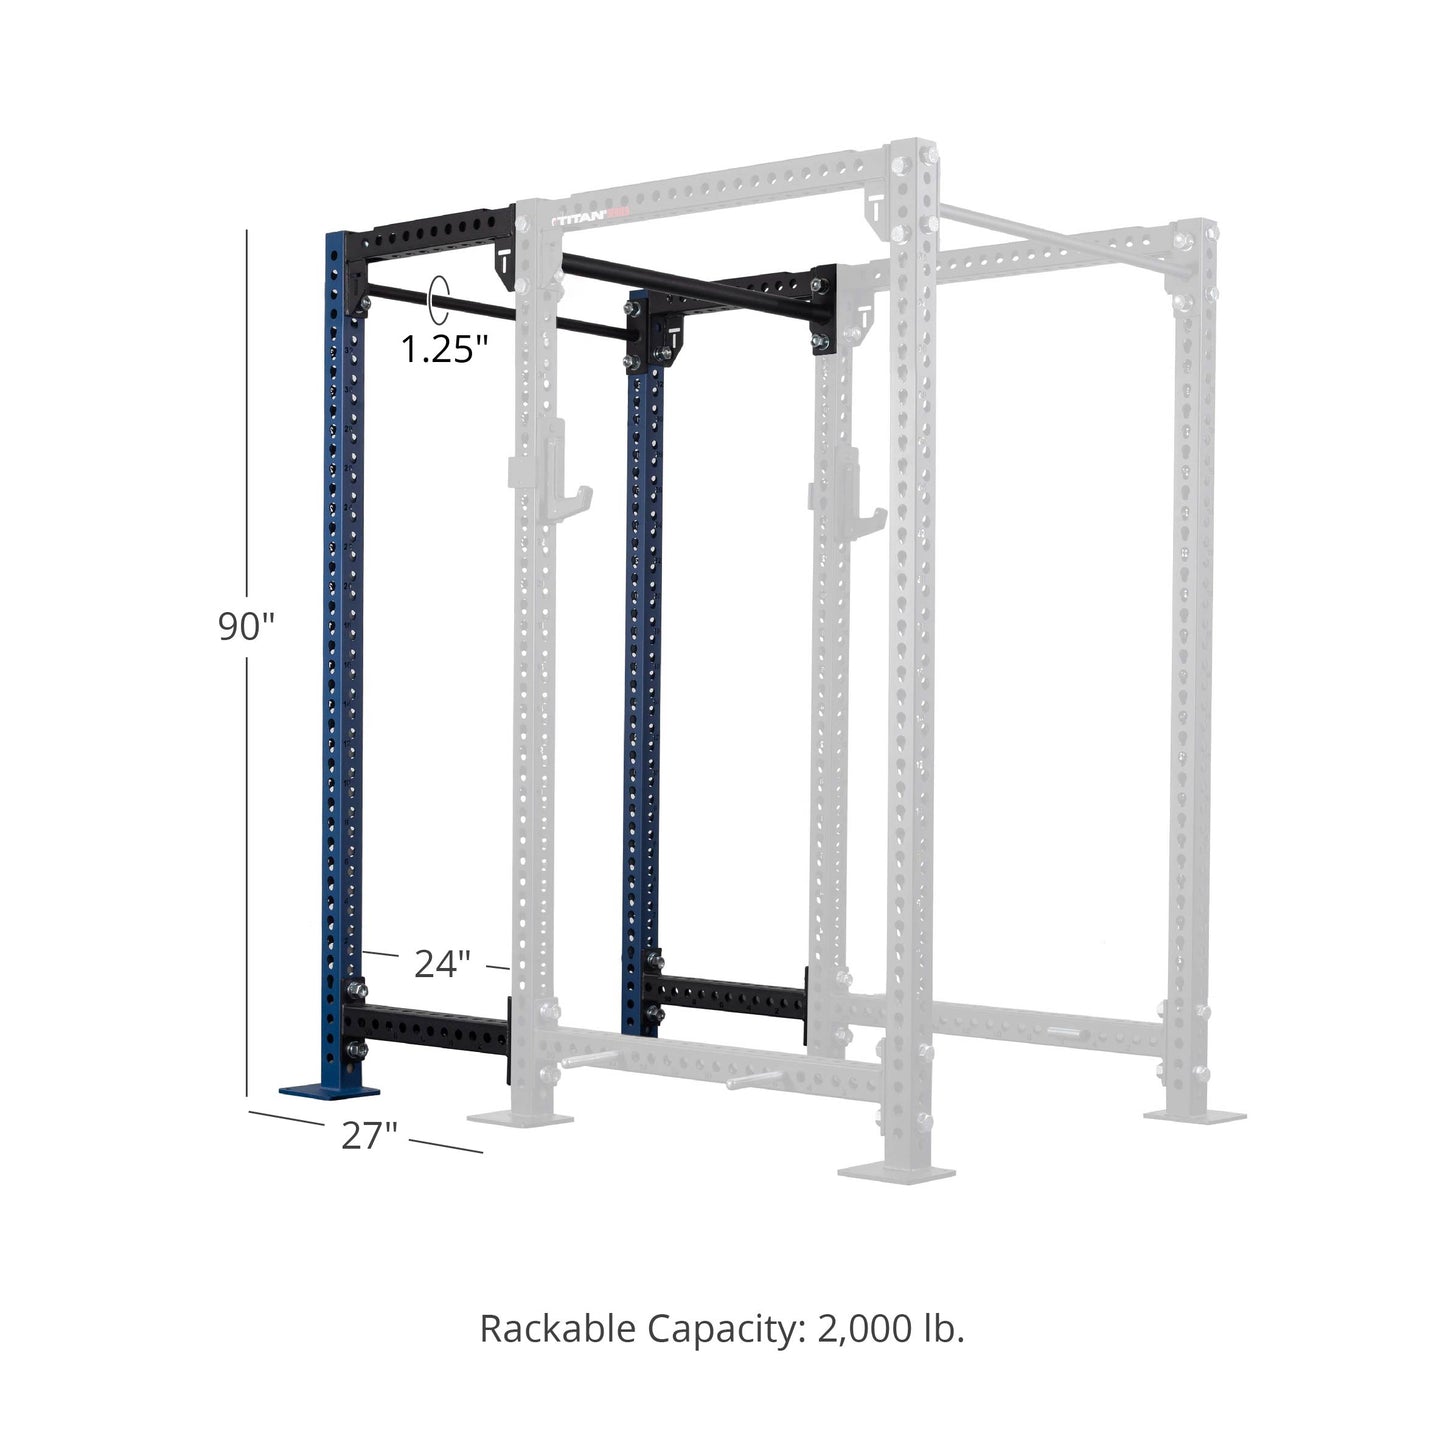 TITAN Series 24" Extension Kit - Extension Color: Navy - Extension Height: 90" - Crossmember: 1.25" Pull-Up Bar | Navy / 90" / 1.25" Pull-Up Bar - view 48